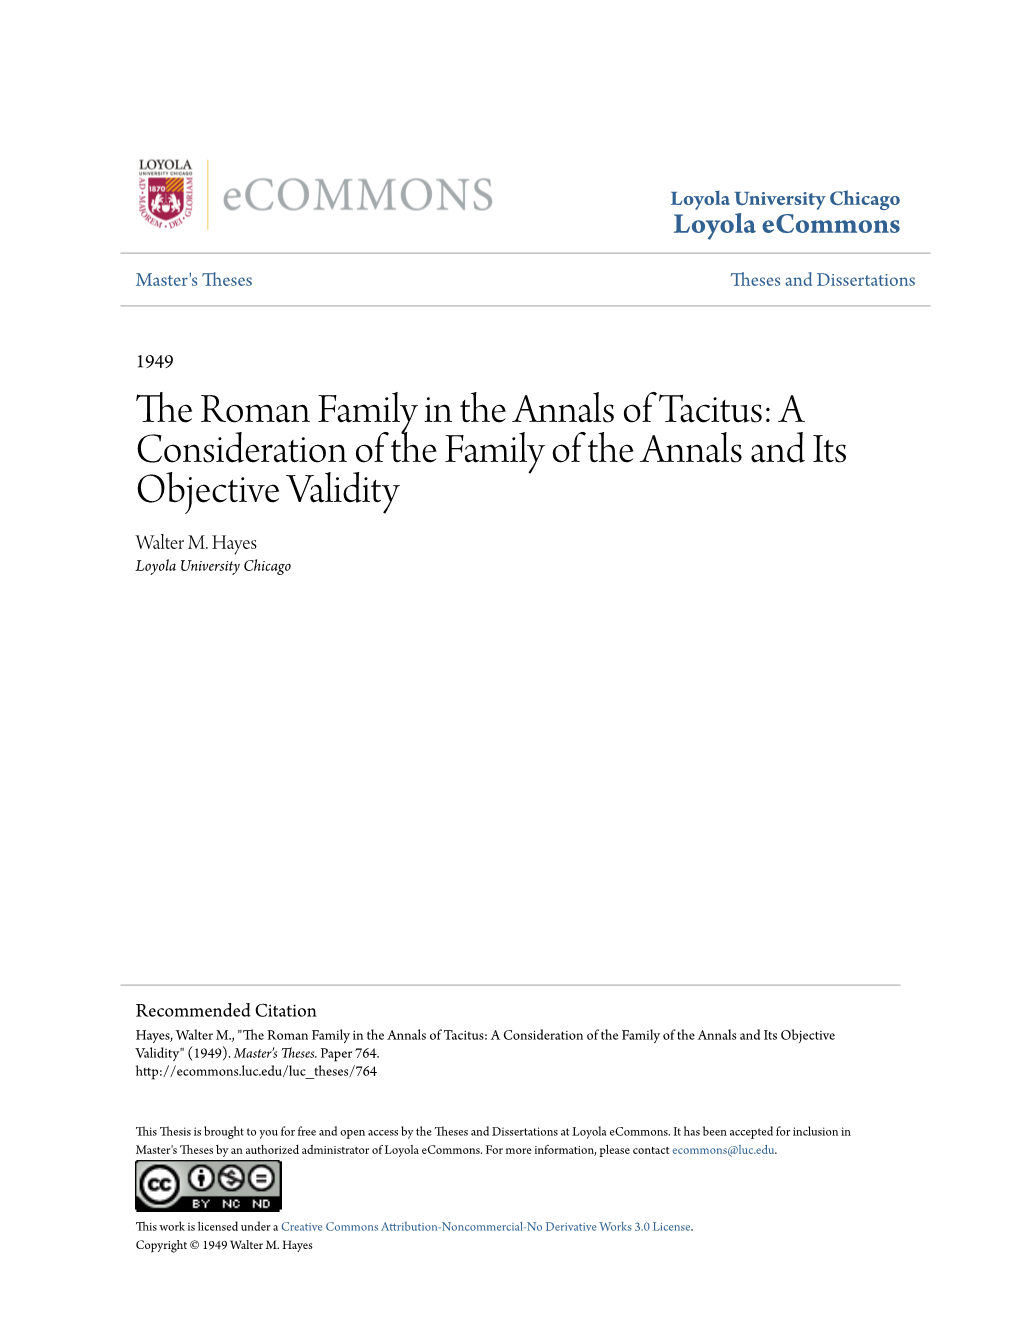 The Roman Family in the Annals of Tacitus: a Consideration of the Family of the Annals and Its Objective Validity Walter M